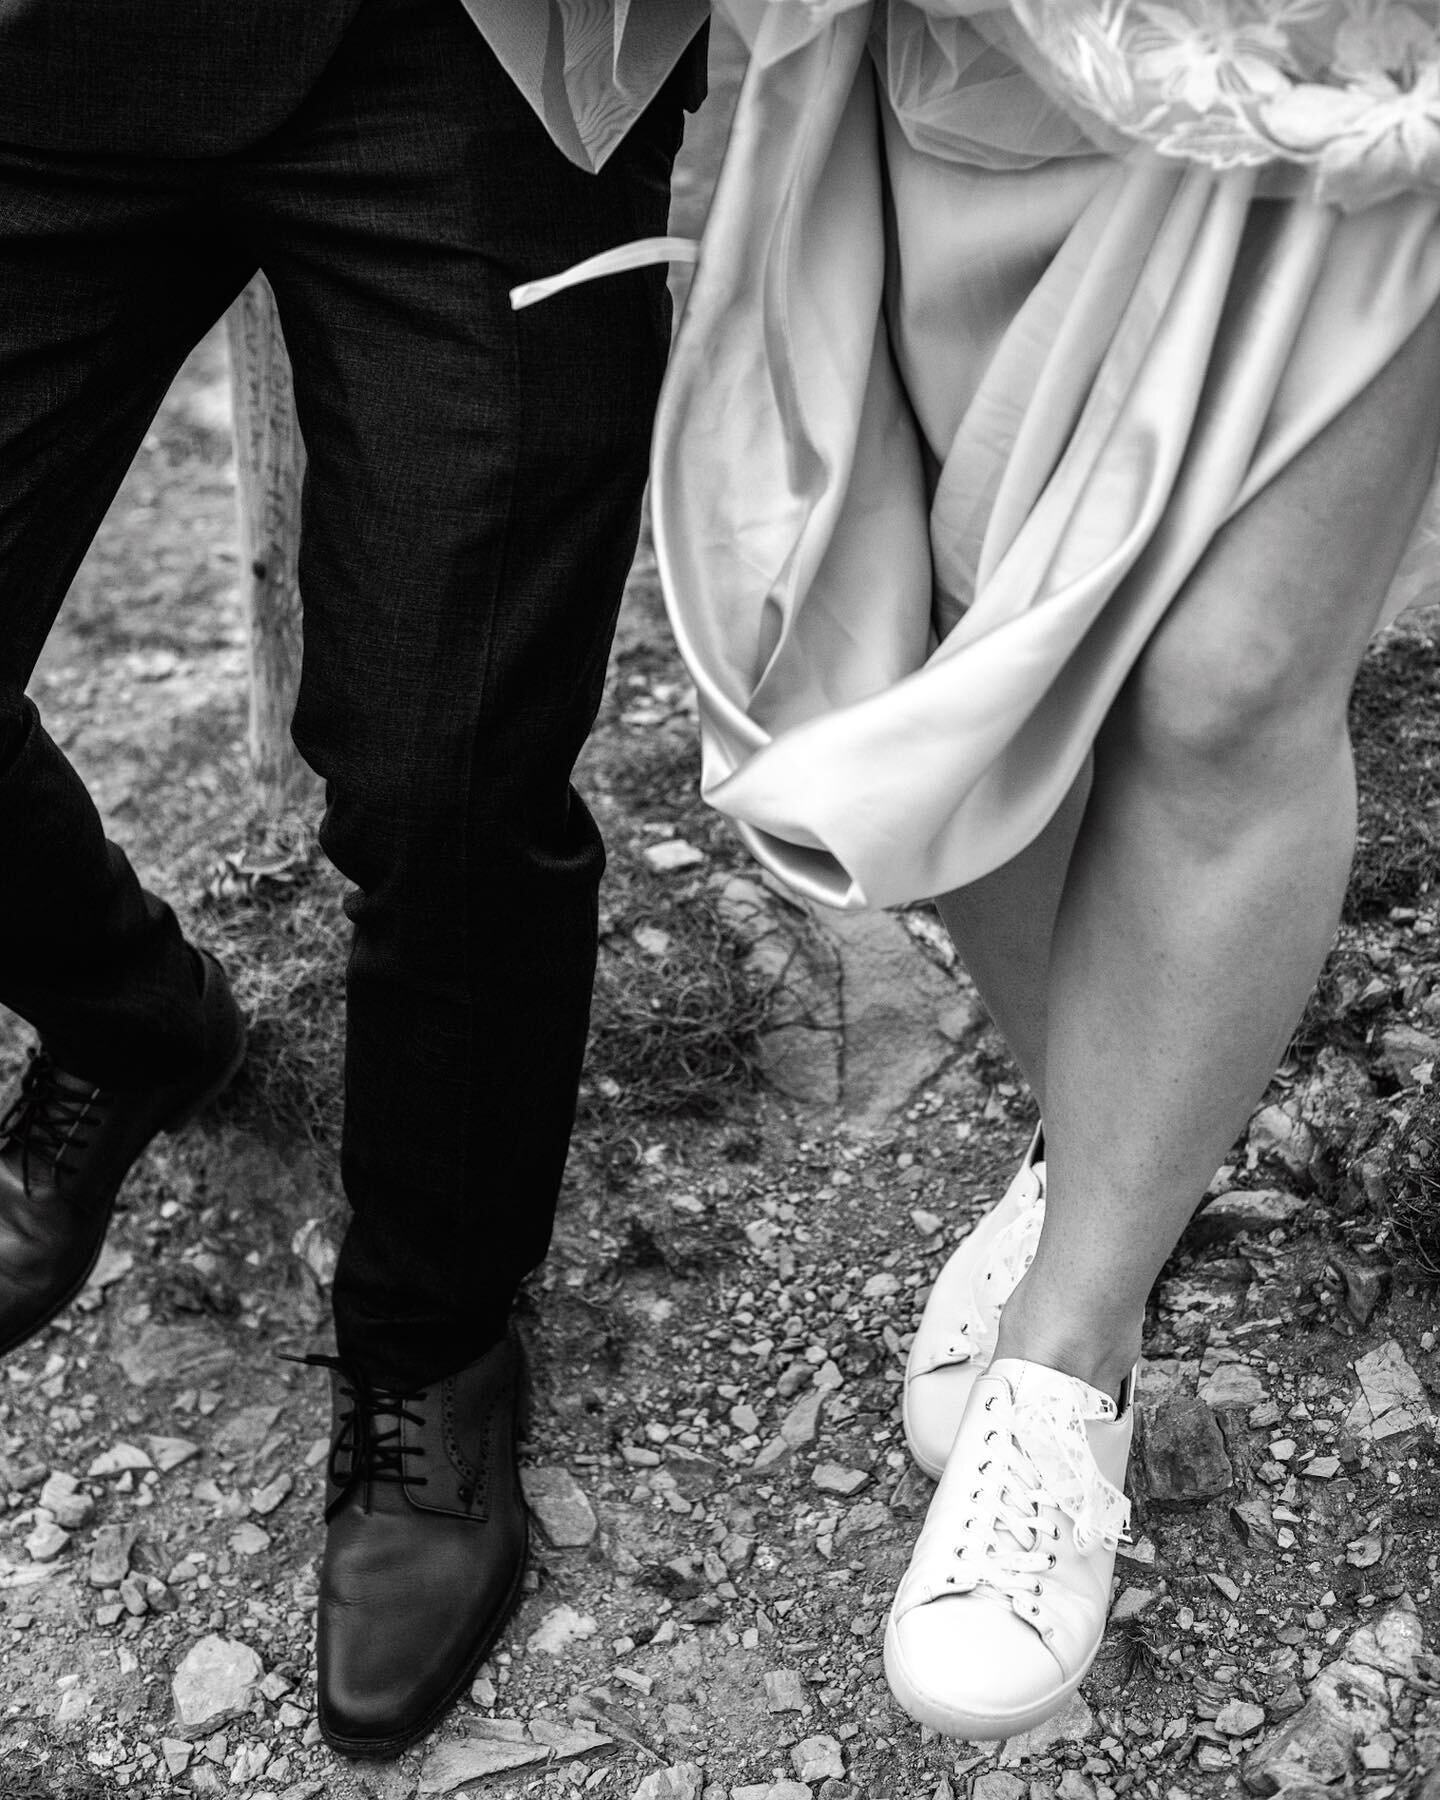 Who said you can&rsquo;t wear trainers on your wedding day&hellip; We love capturing the quirks of your special day. 

#weddingphotography #cornwallweddingphotographer #cornwallweddingvideographer #weddinginspiration #photographer #cornwall #cornwall